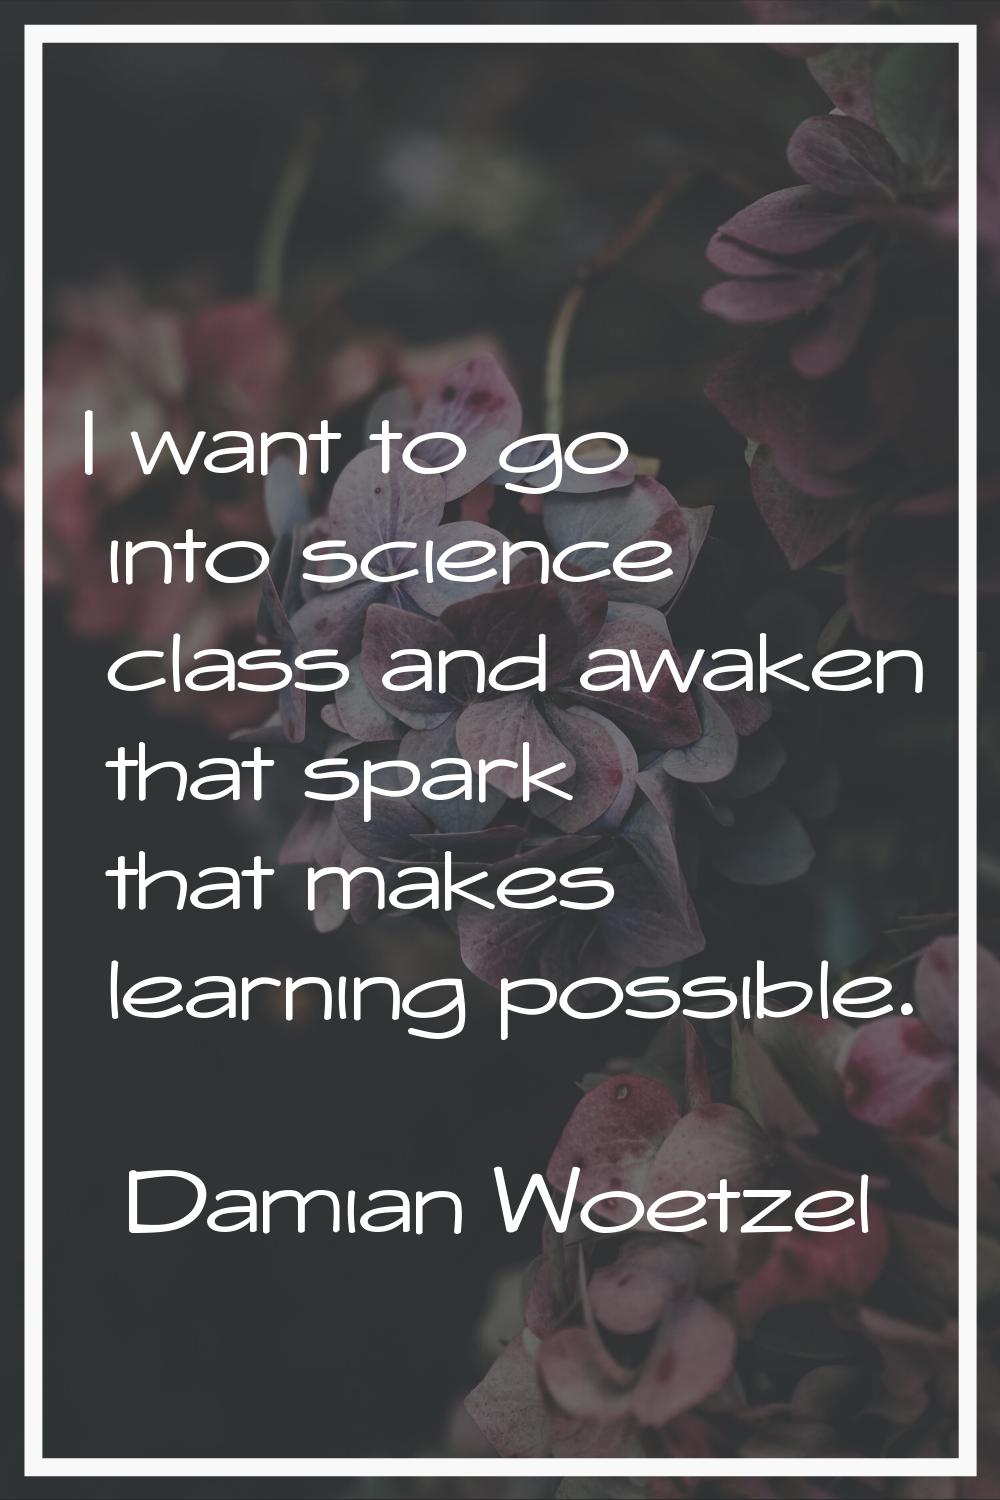 I want to go into science class and awaken that spark that makes learning possible.